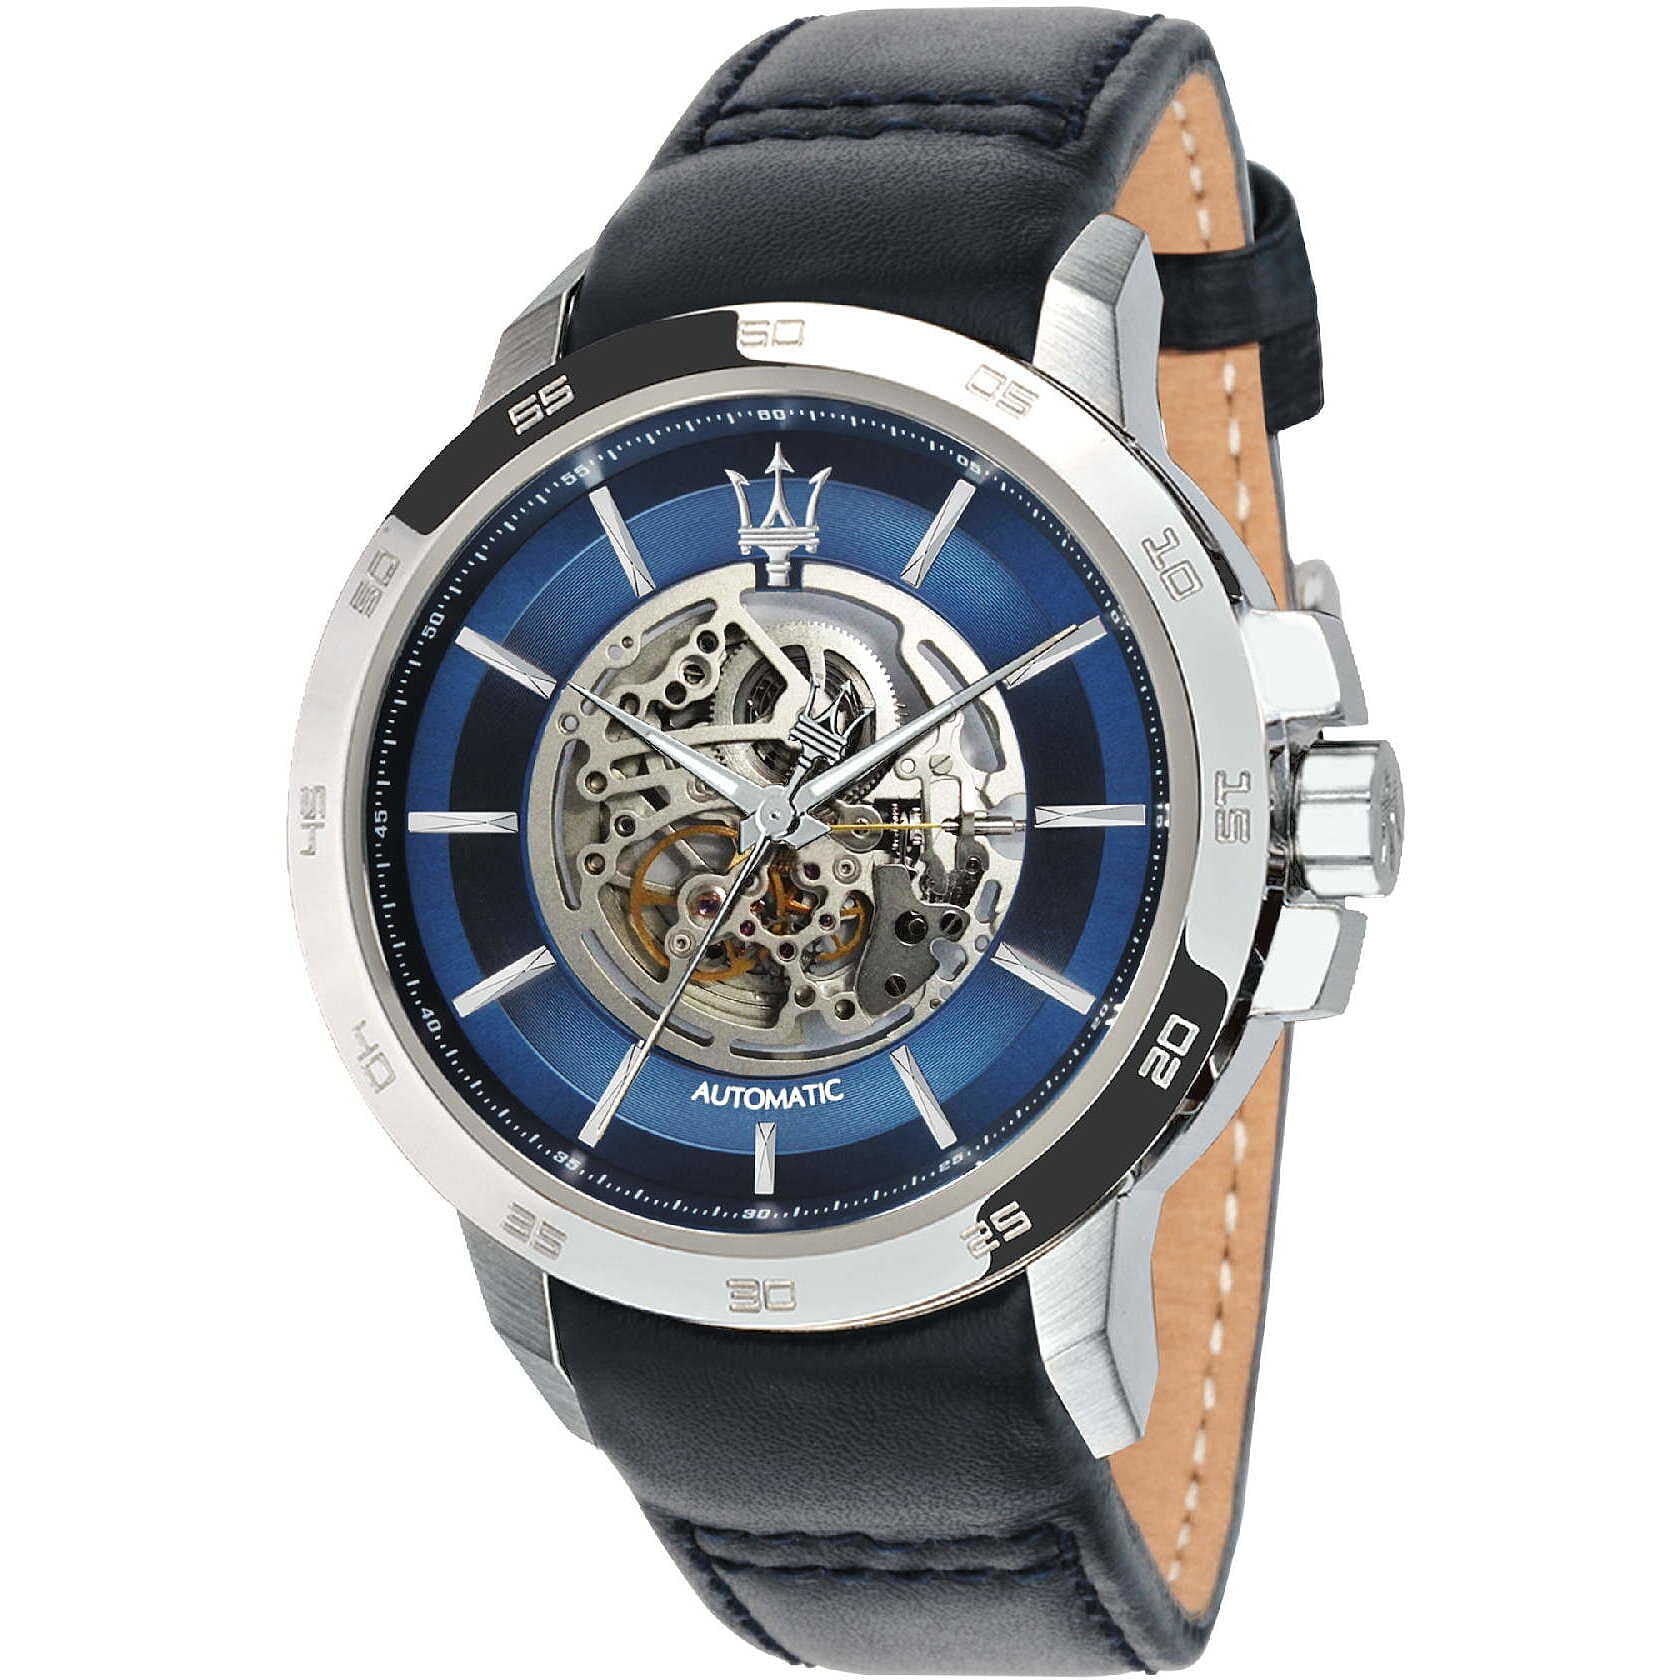 Maserati Ingegno Automatic Blue Open Heart Dial Men's Watch R882111900 ...